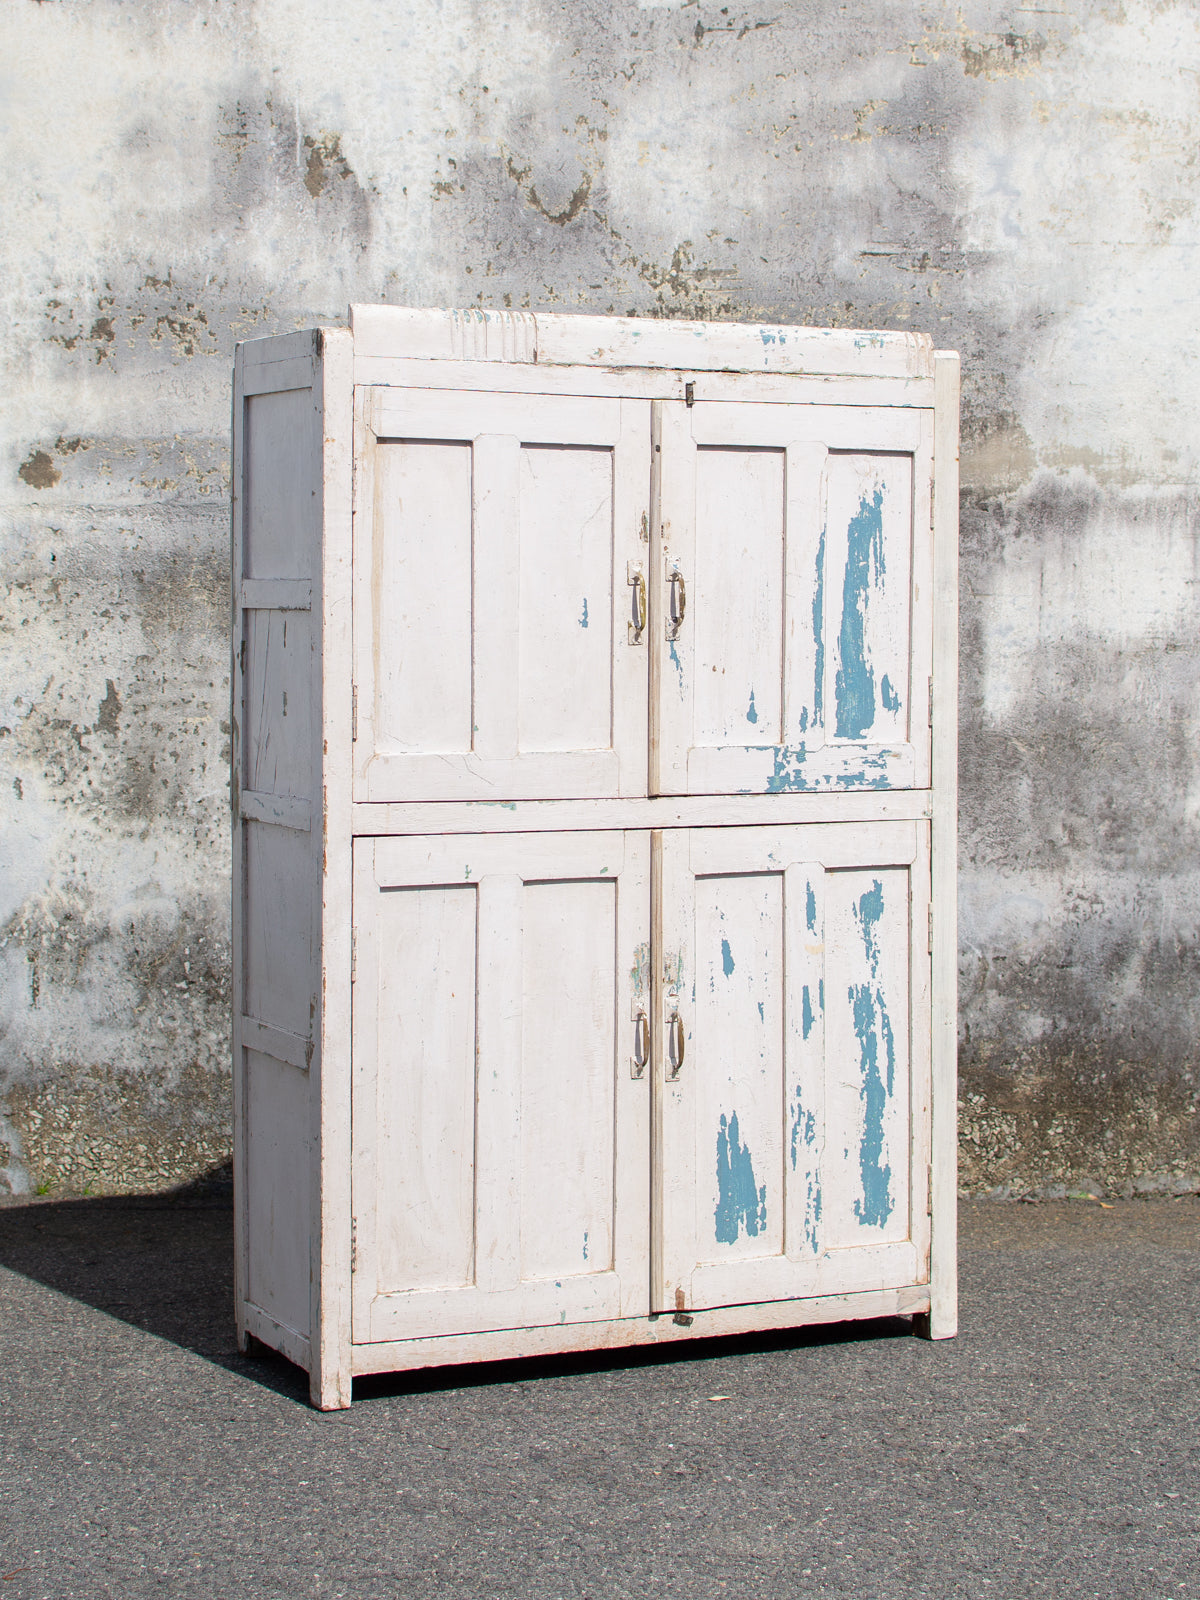 Antique Painted Wooden Cabinet